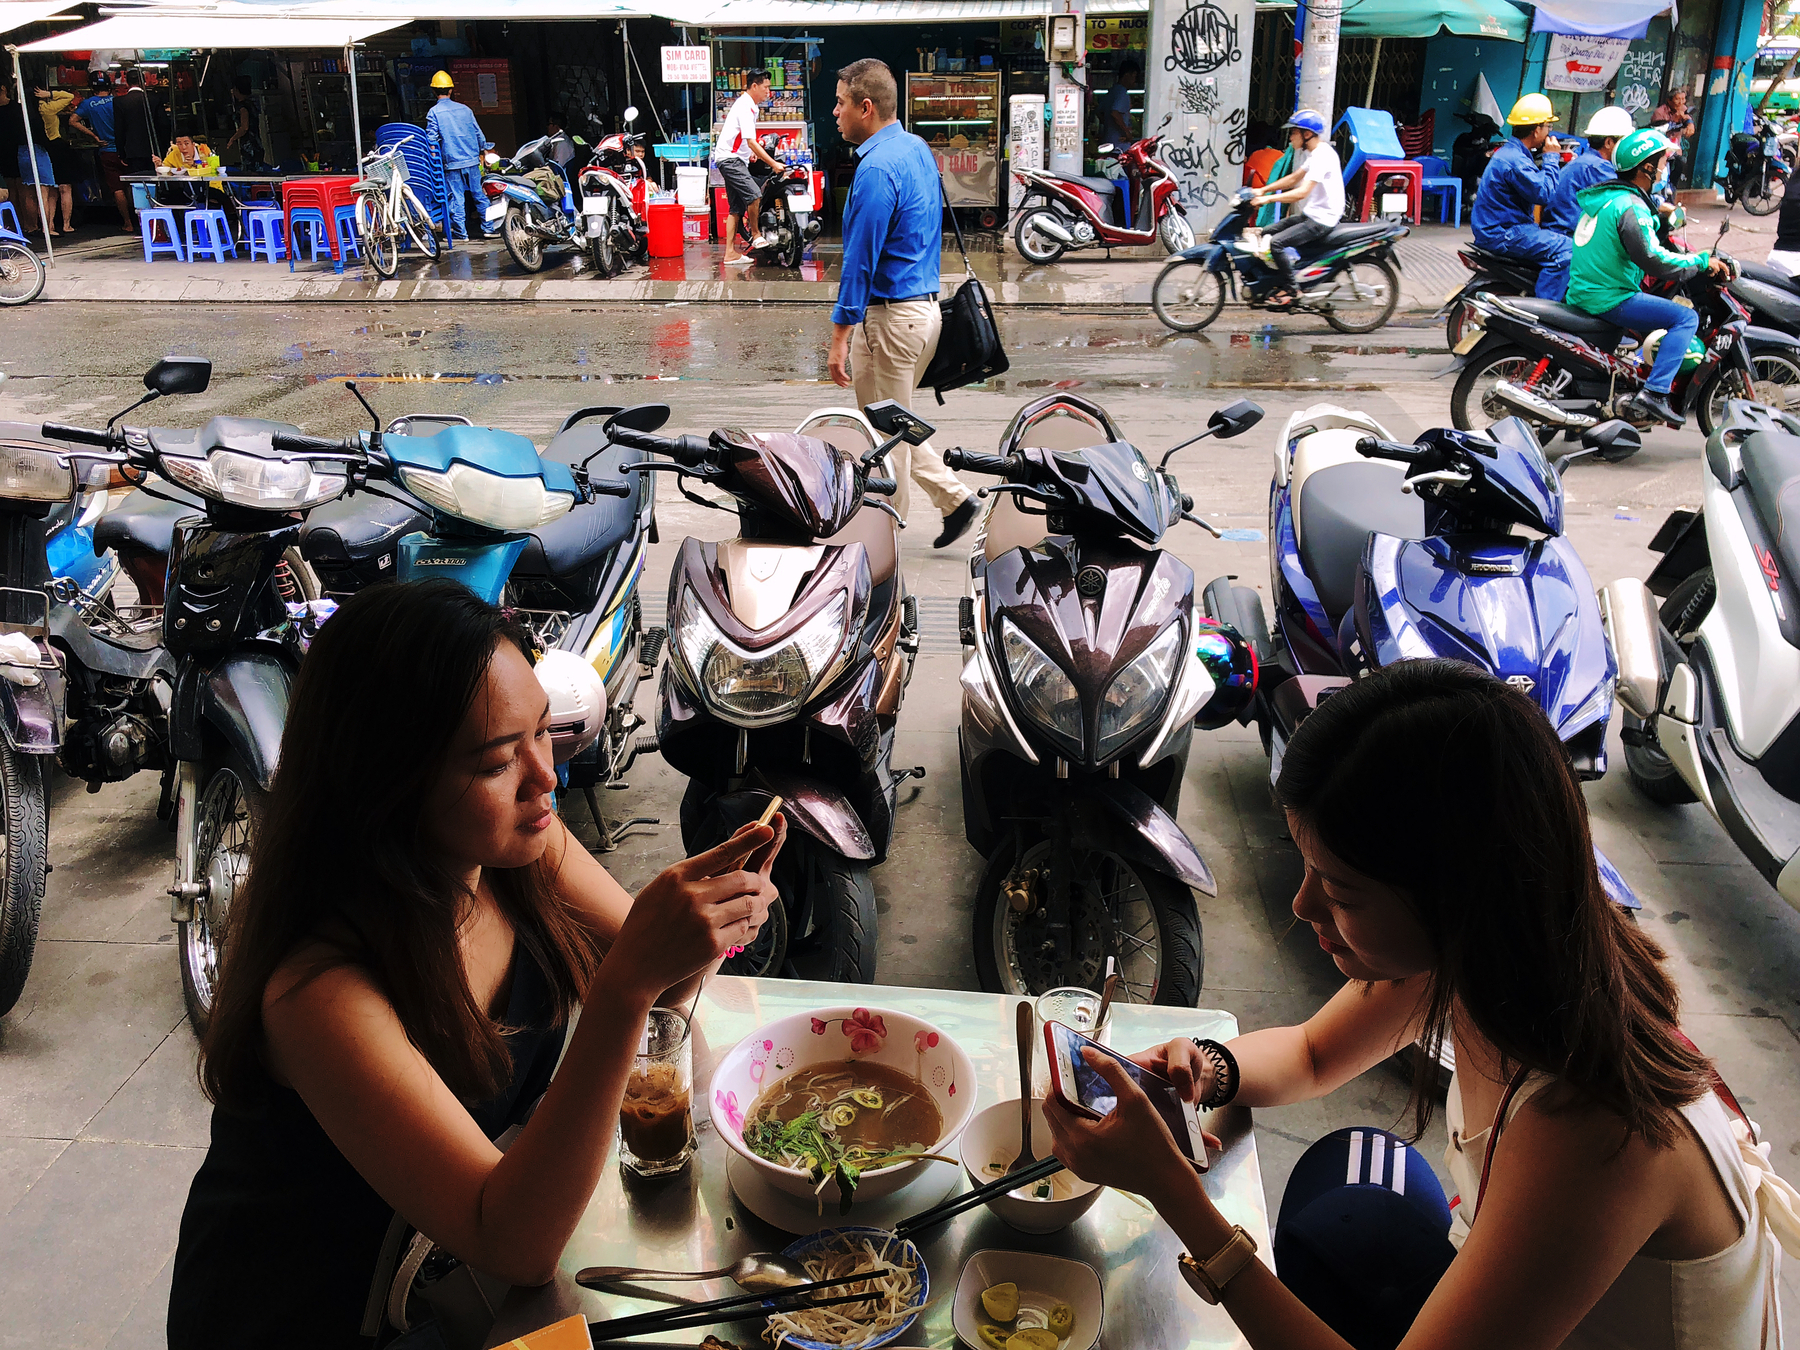 two girls eat a bowl of pho in Vietnam, motorcycles and people in the background